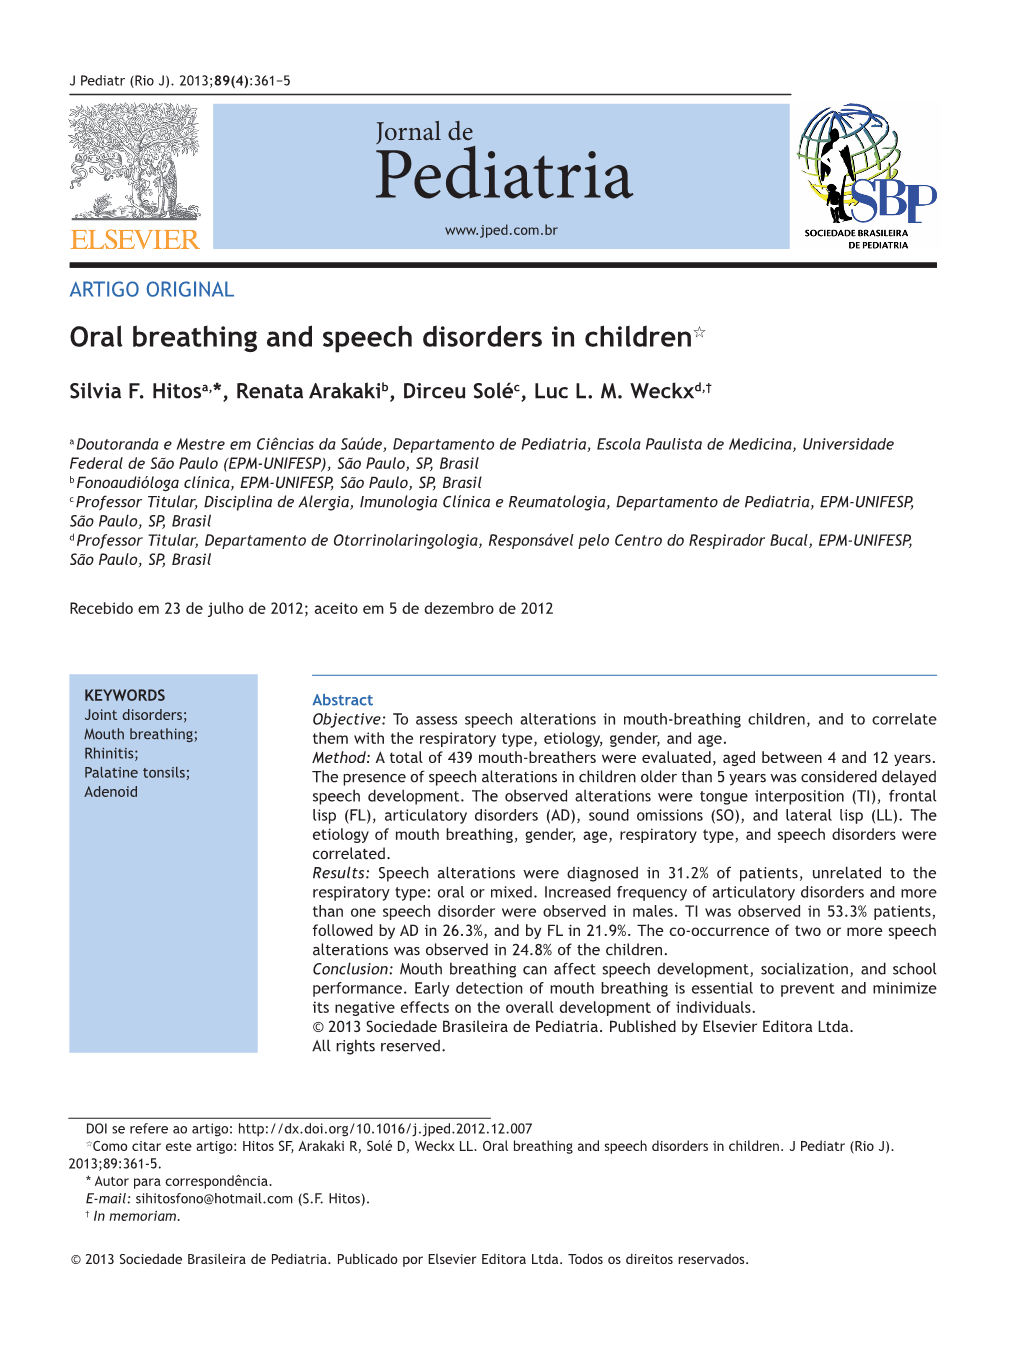 Oral Breathing and Speech Disorders in Children☆